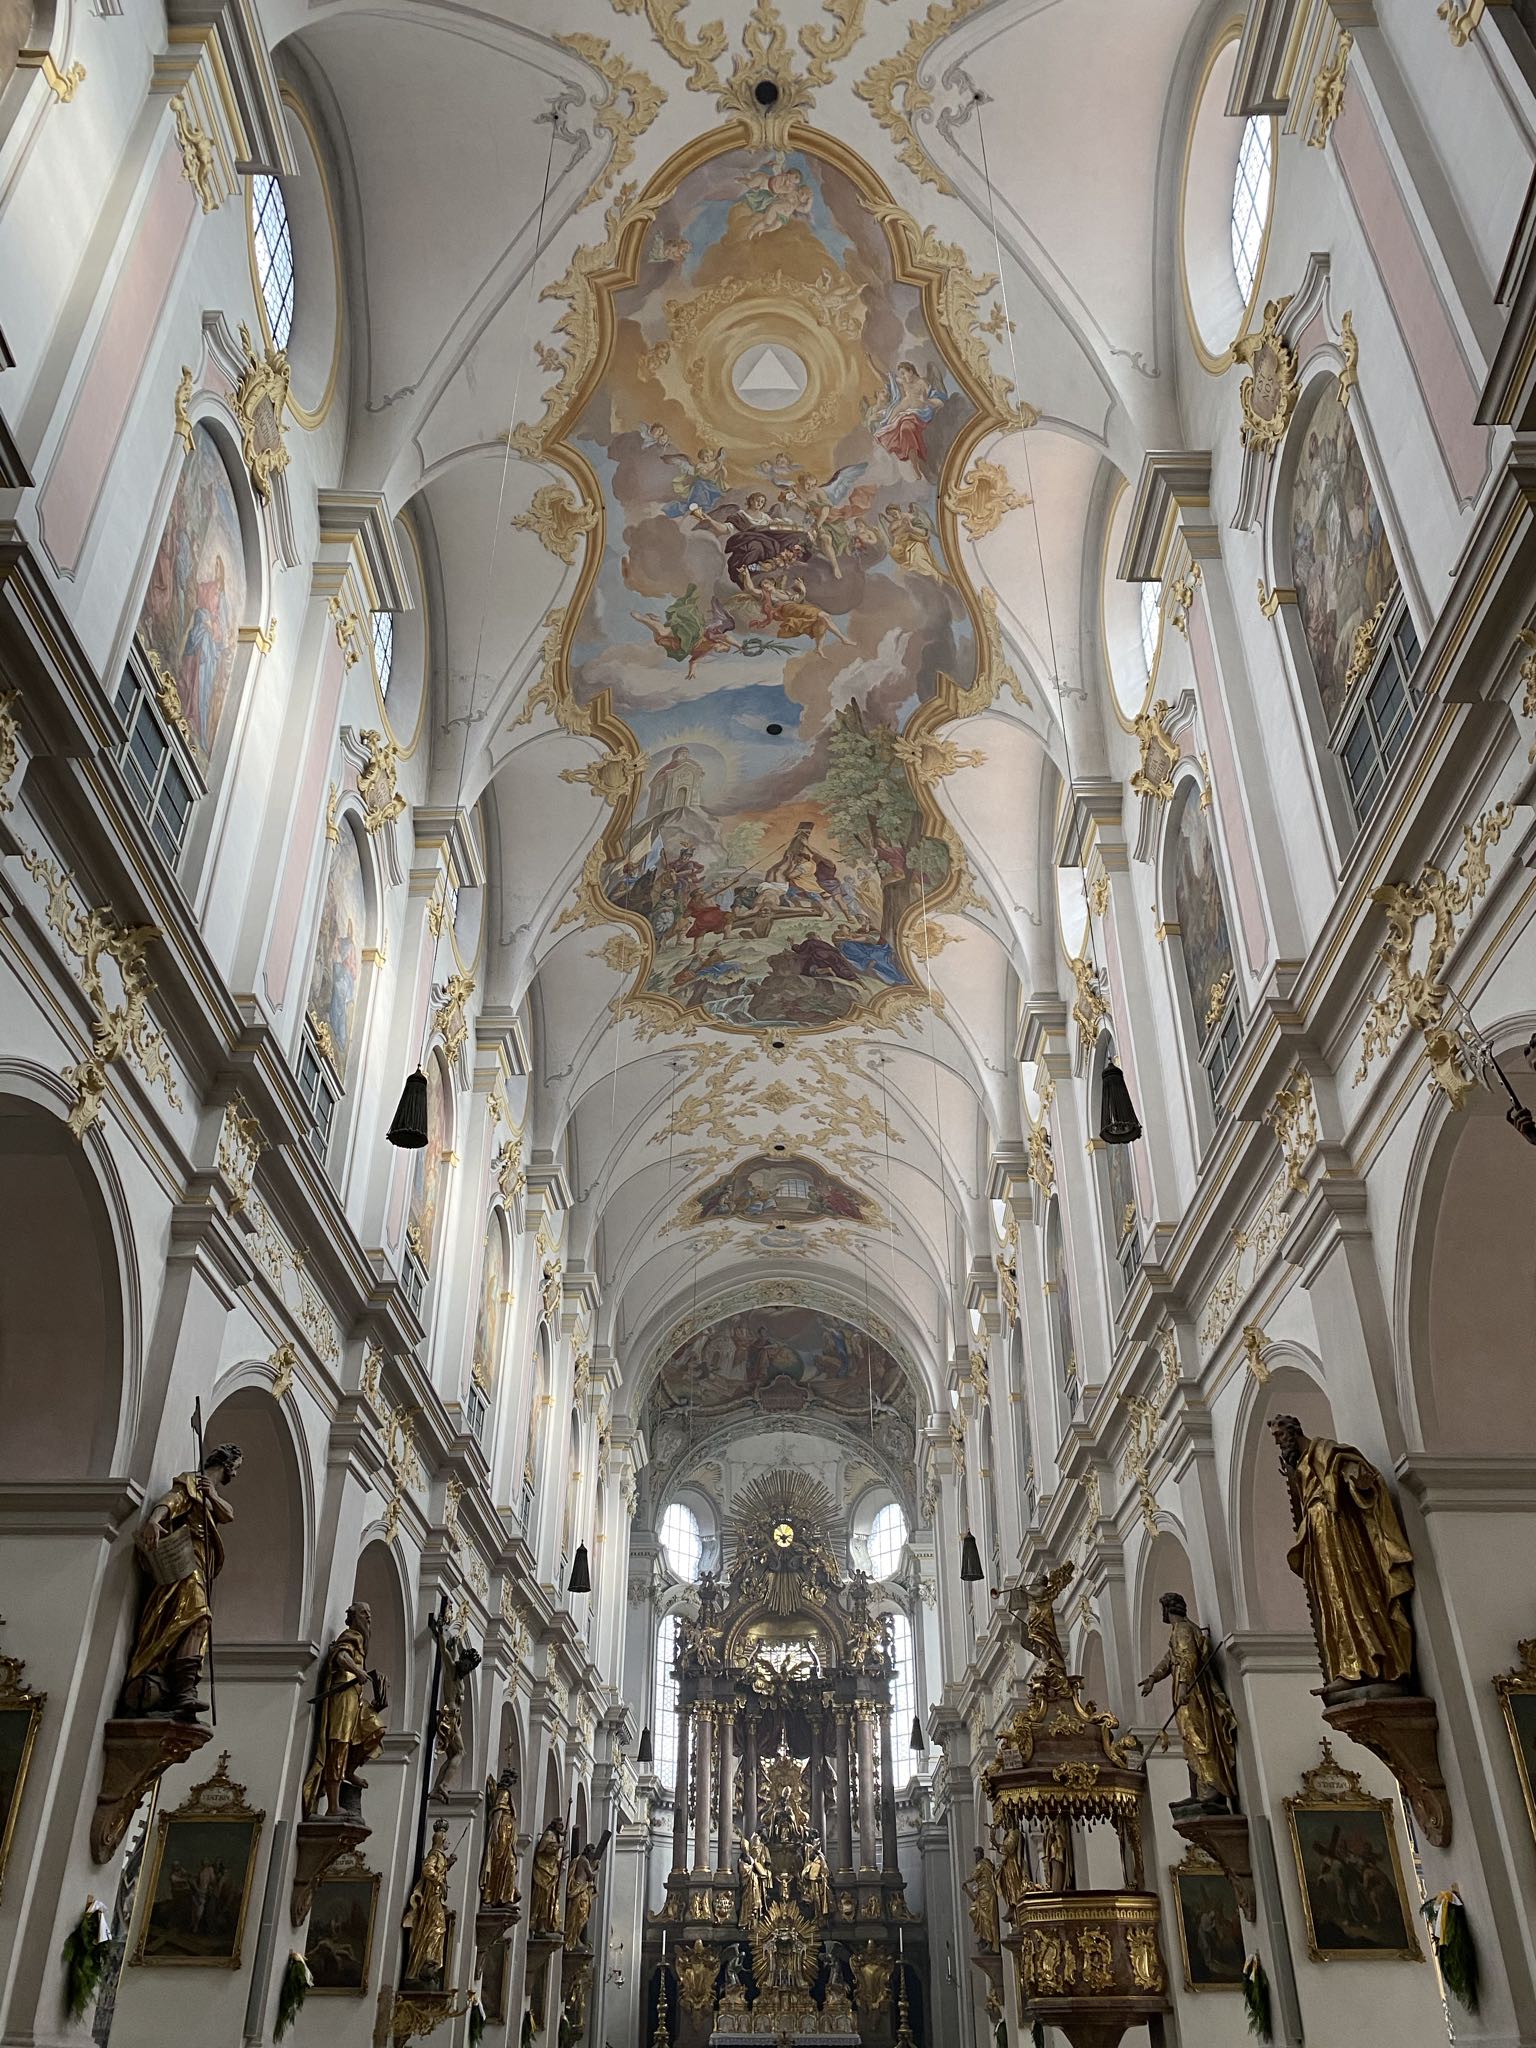 Photo 16 of 49 from the album Munich 2019.